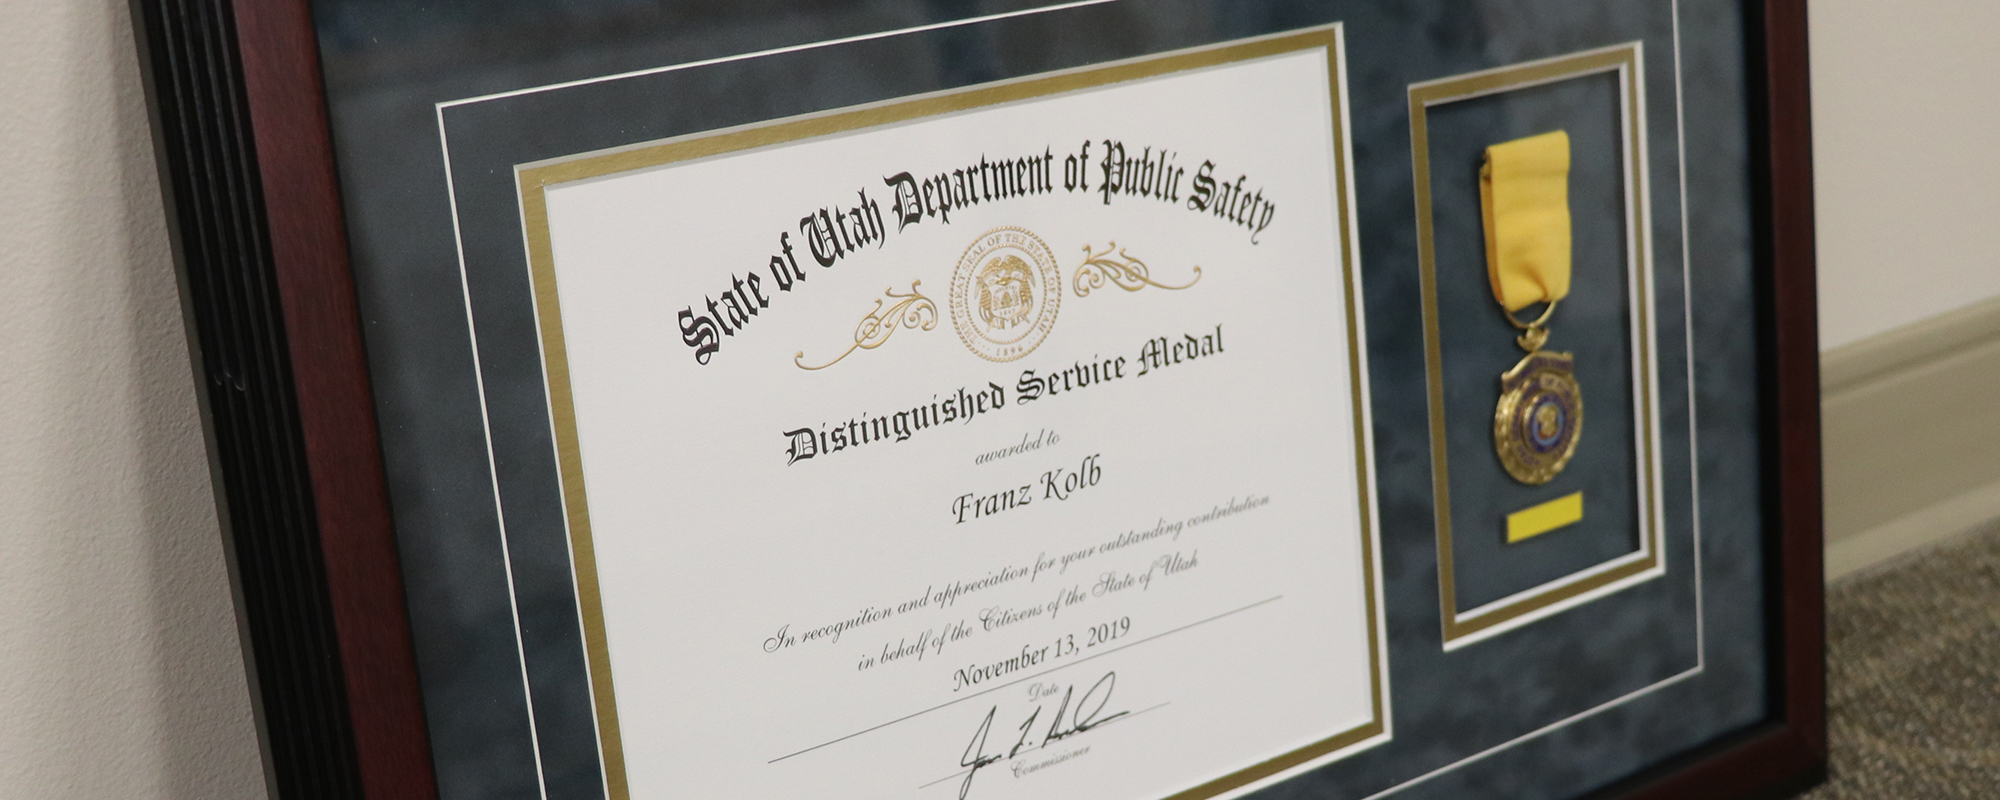 Featured image for “Franz Kolb Receives Distinguished Service Award from the Department of Public Safety”